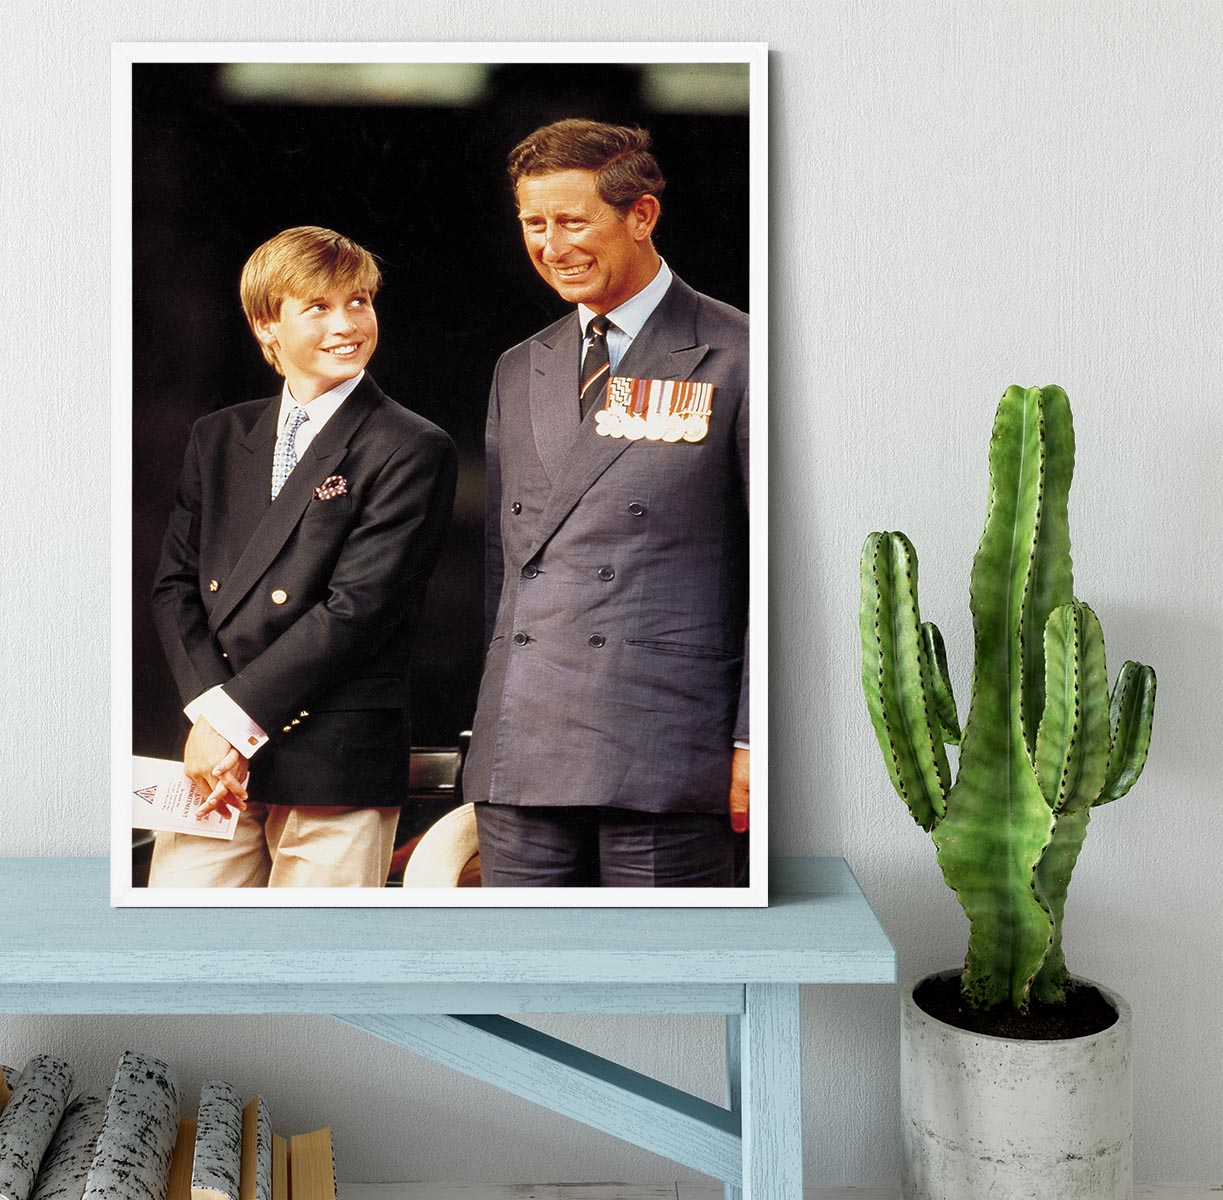 Prince William with Prince Charles at a VJ Parade Framed Print - Canvas Art Rocks -6